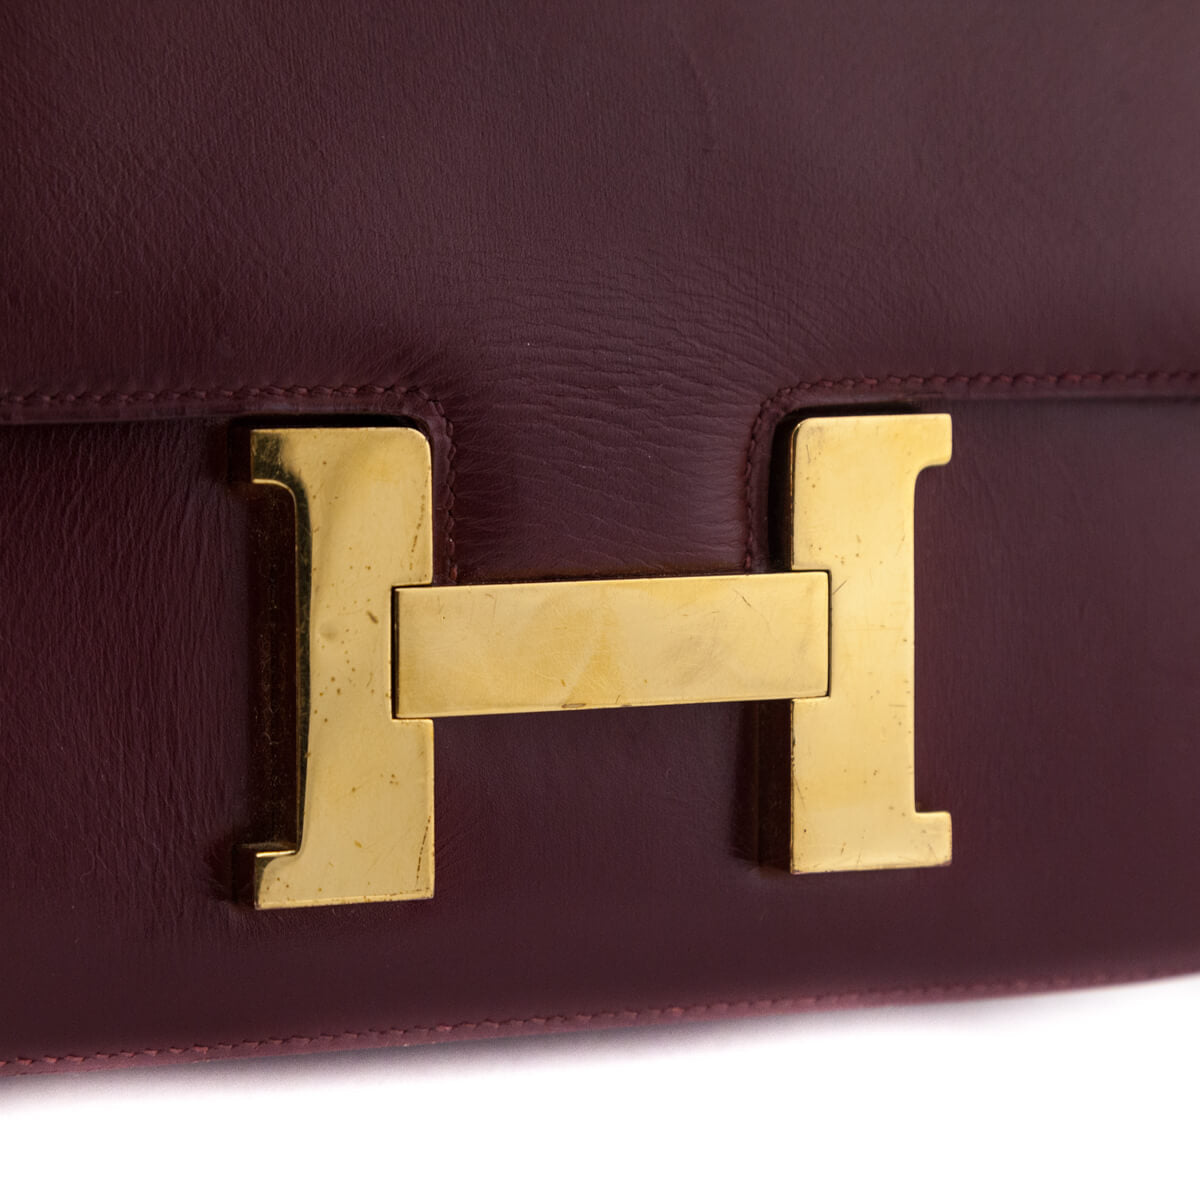 Hermes Rouge H Box Calf Vintage Constance 23 - Love that Bag etc - Preowned Authentic Designer Handbags & Preloved Fashions